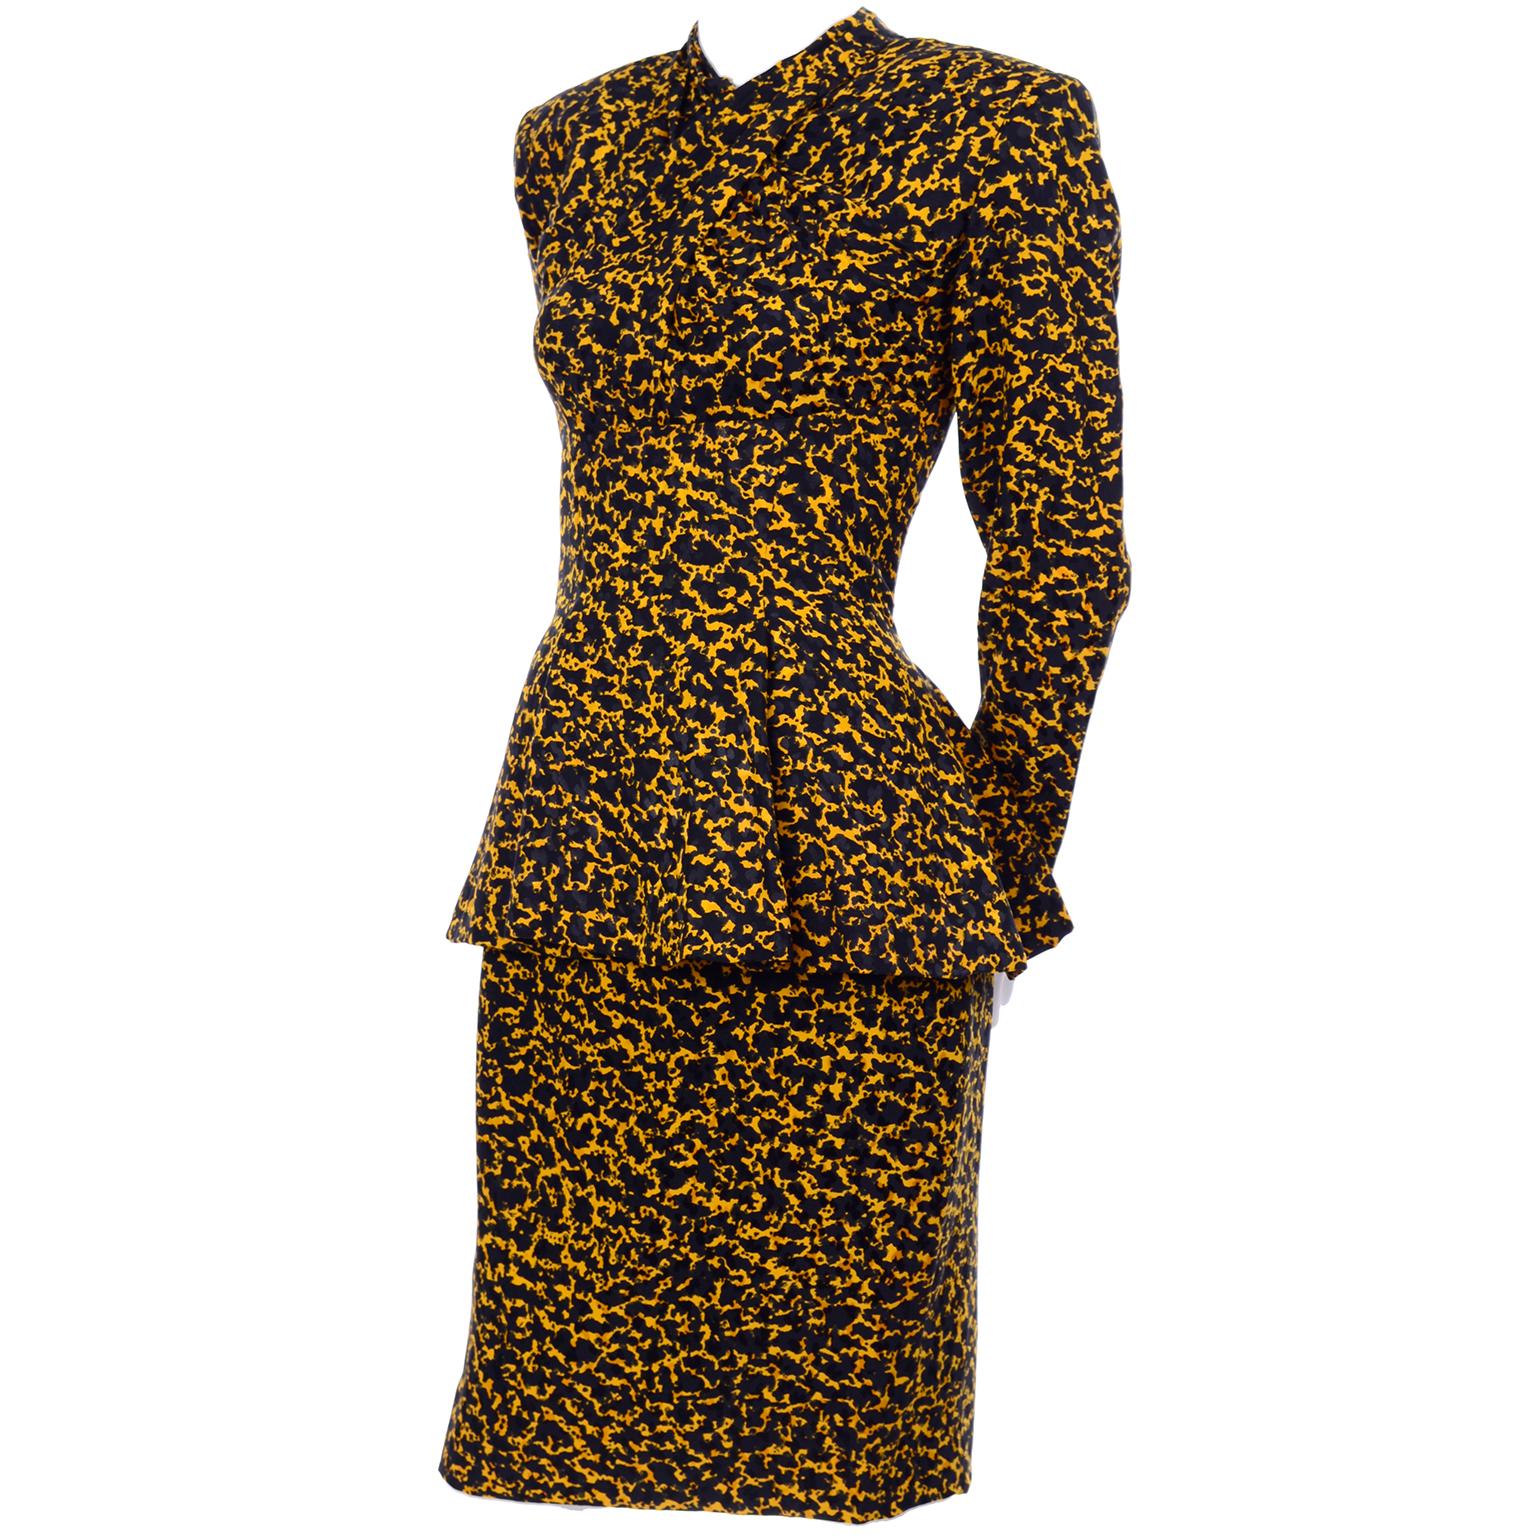 This is a vintage Vicky Tiel Couture silk skirt suit originally purchased at Bergdorf Goodman in the 1980's. This lovely suit looks like a dress when worn. The outfit is in a 100% silk black and yellow abstract print that resembles an animal print,